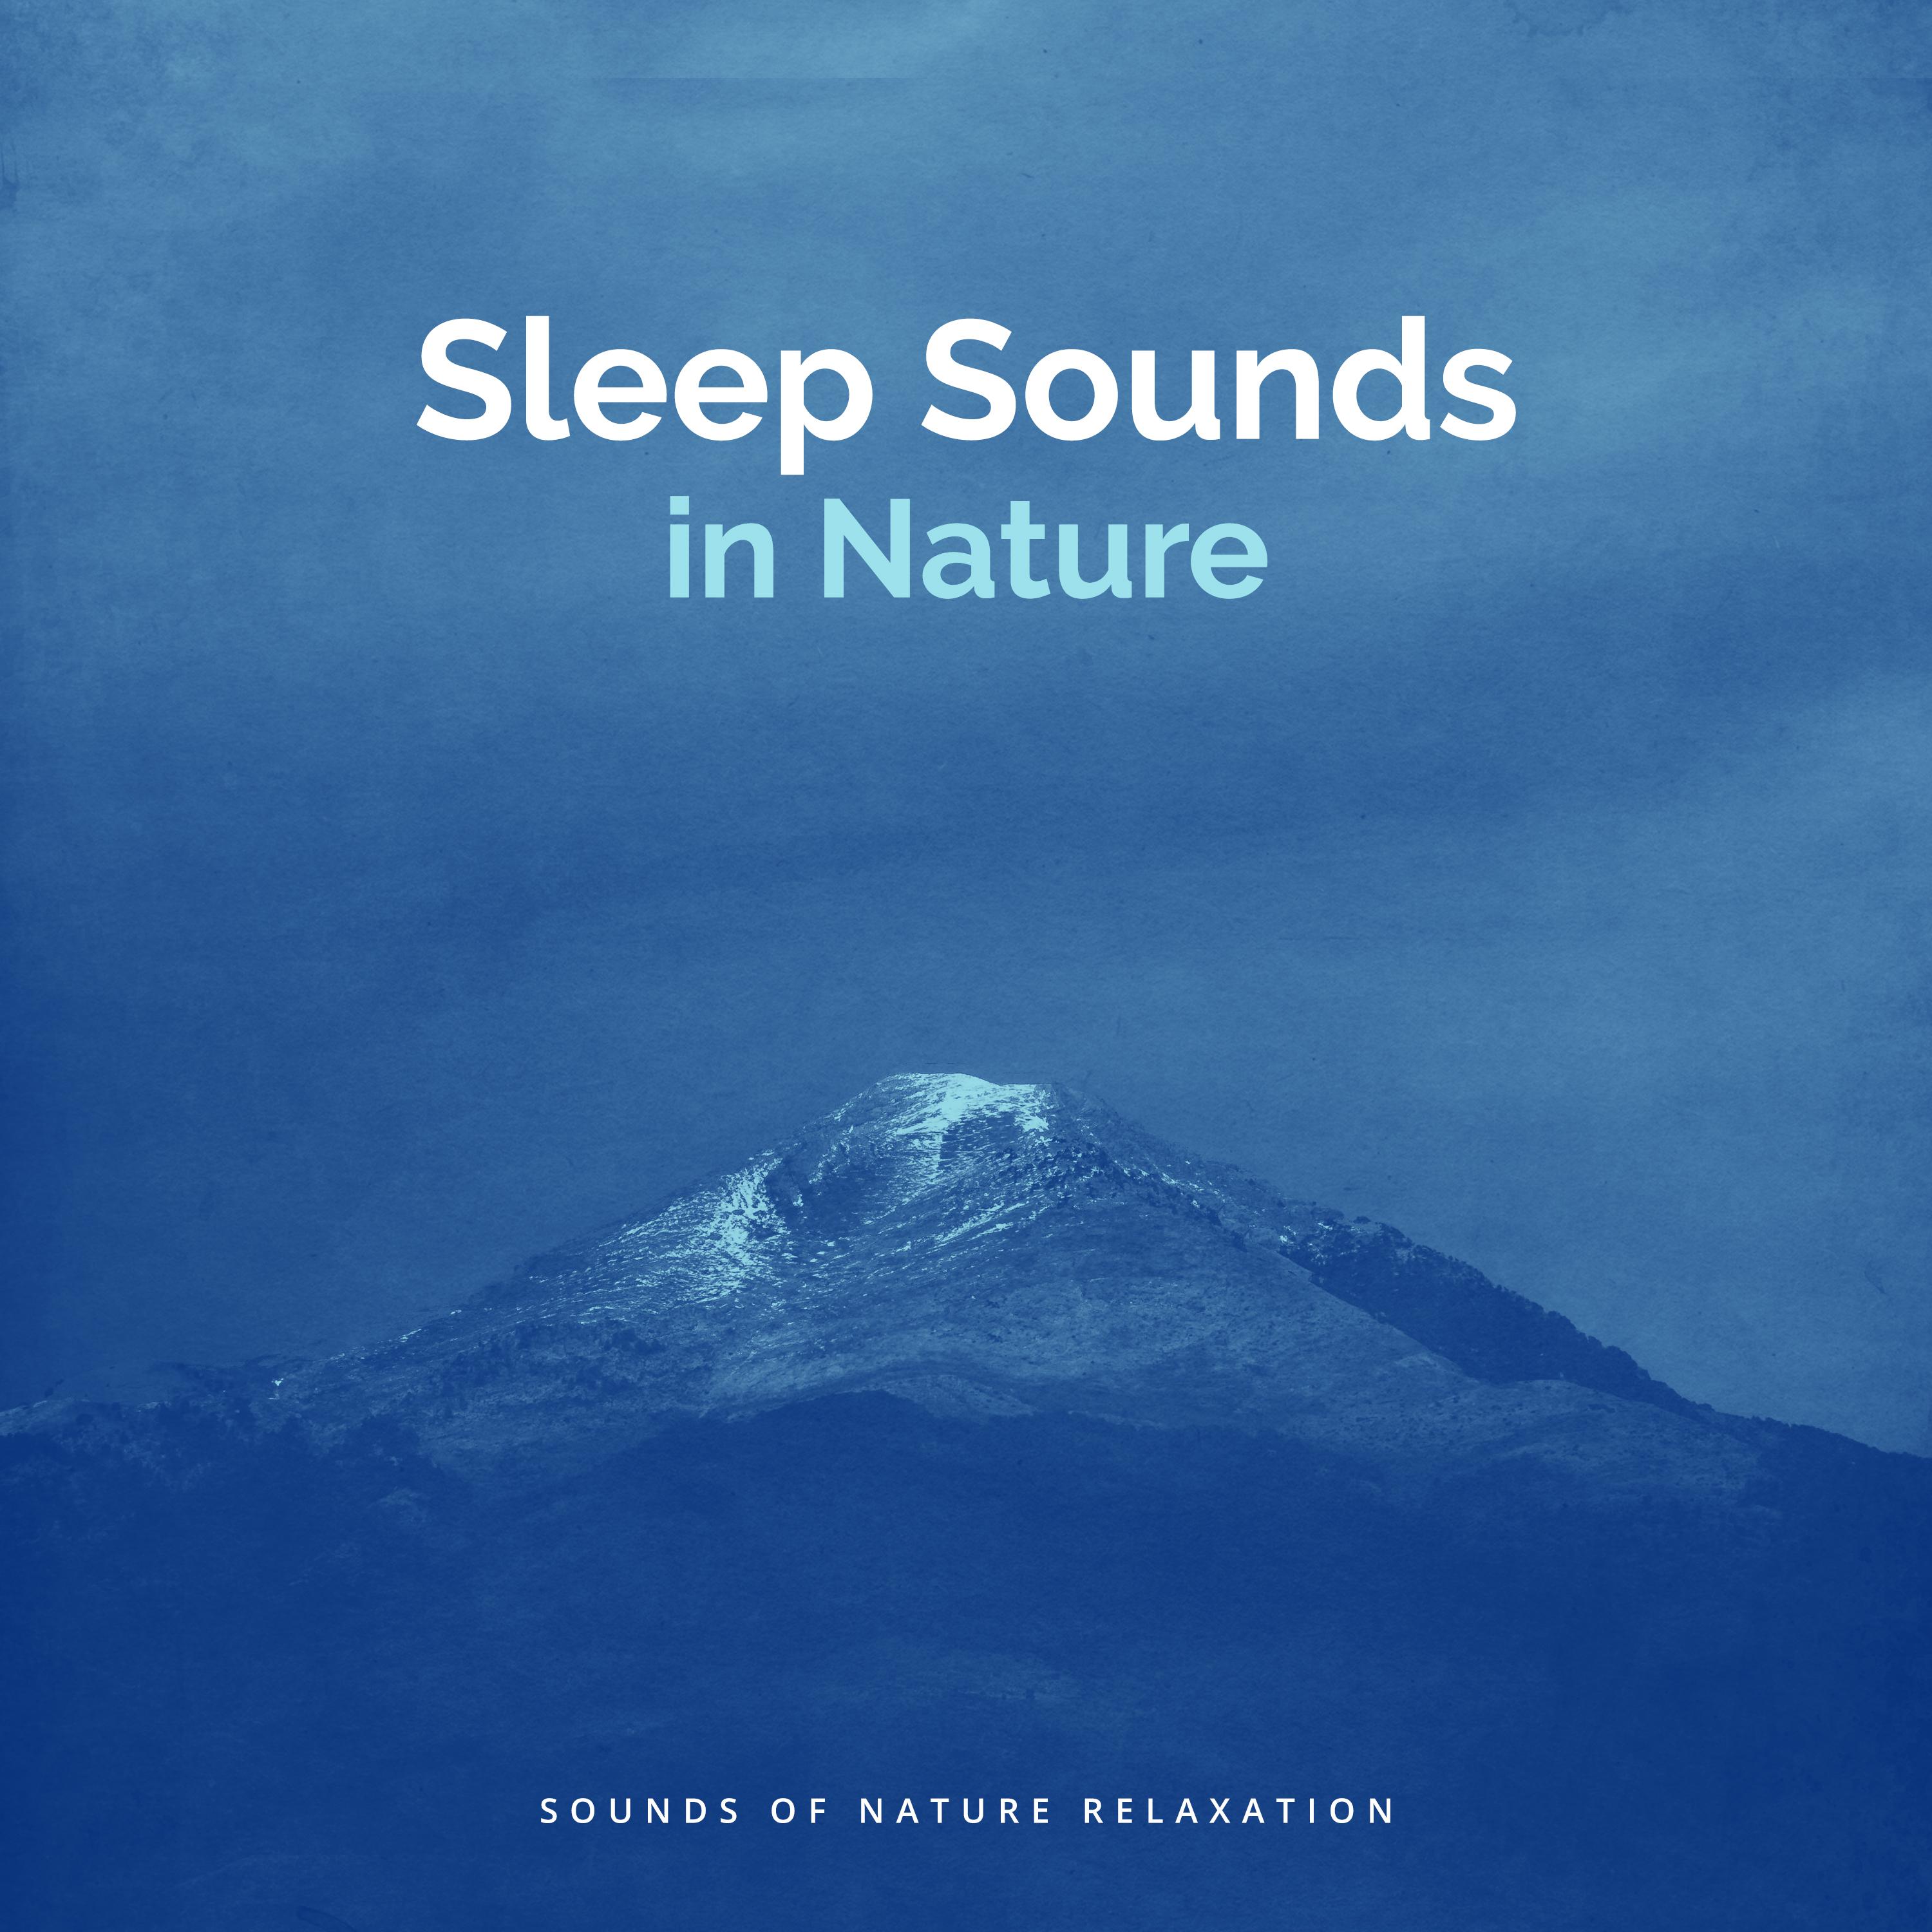 Sleep Sounds in Nature